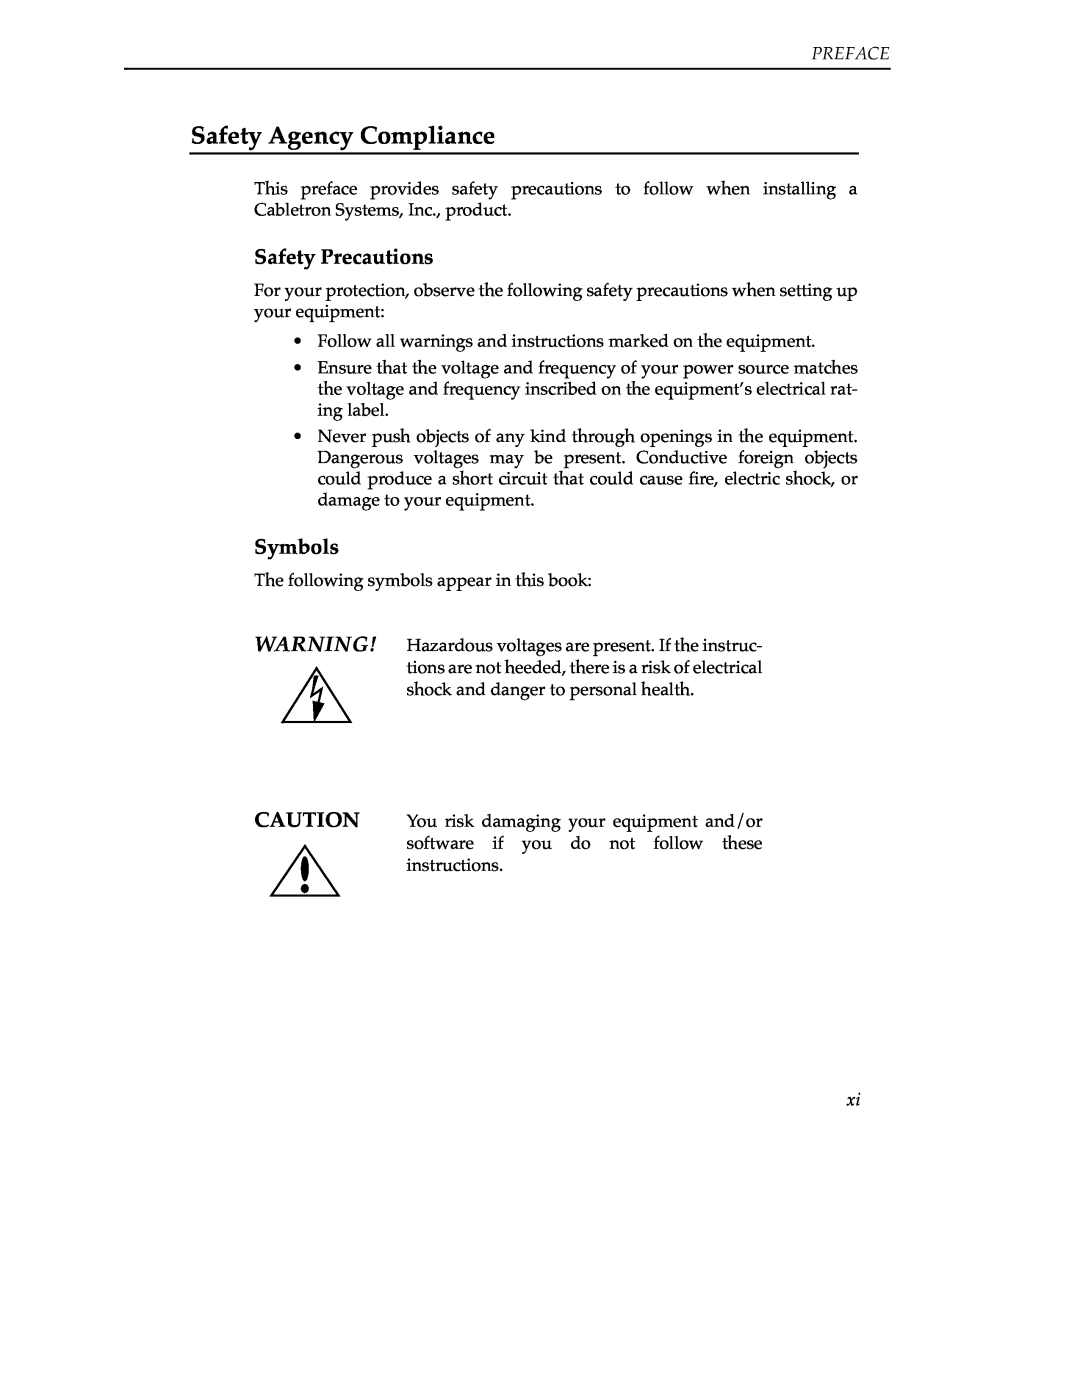 Cabletron Systems 9A000 manual Safety Agency Compliance, Safety Precautions, Symbols, Preface 